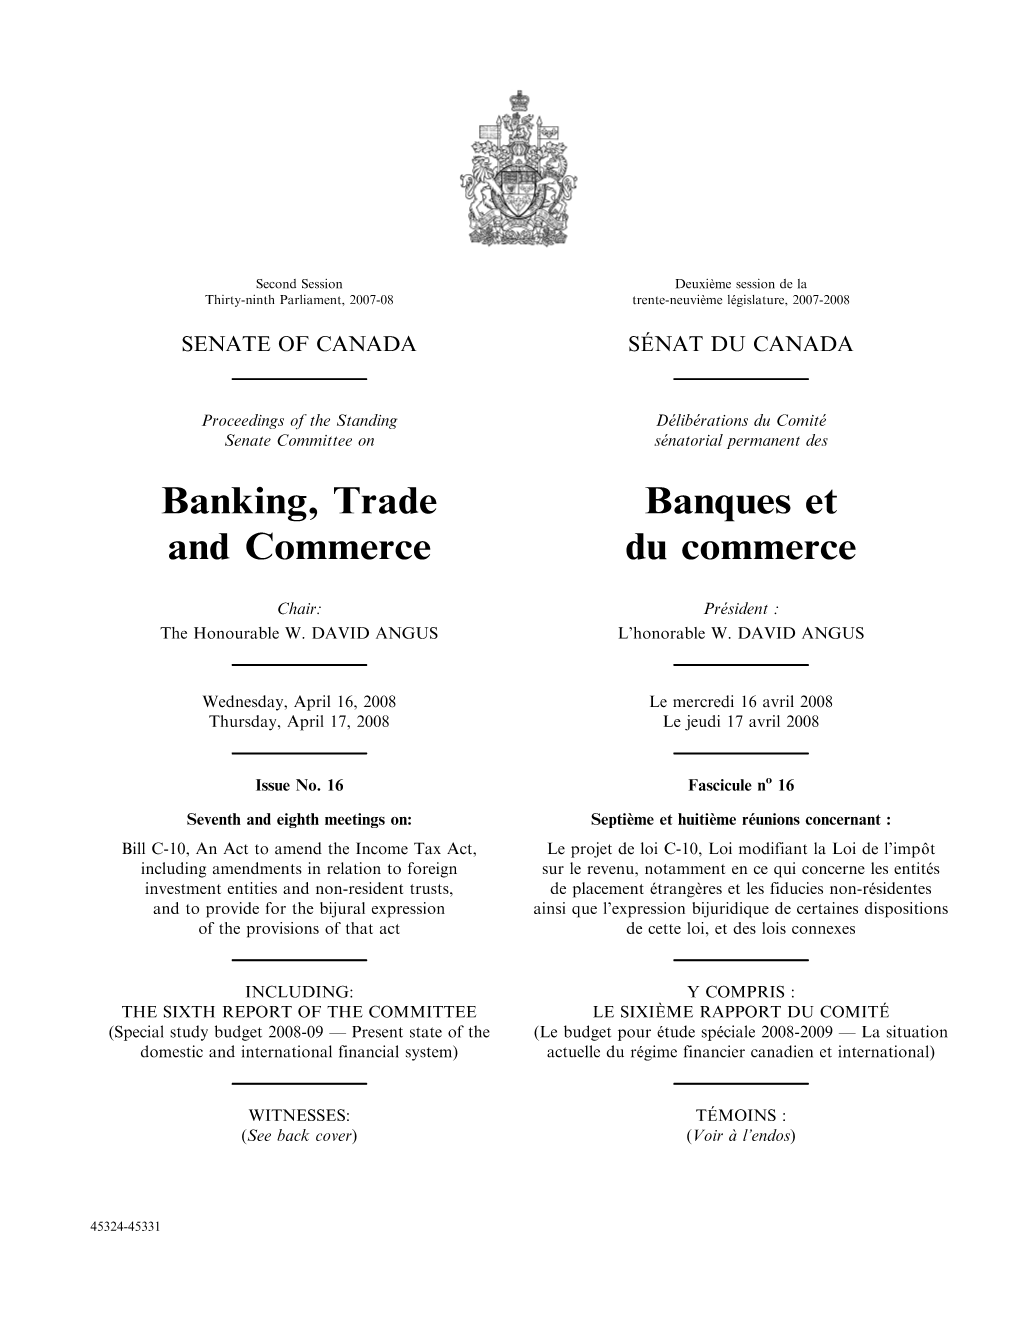 BANKING, TRADE and COMMERCE BANQUES ET DU COMMERCE the Honourable W